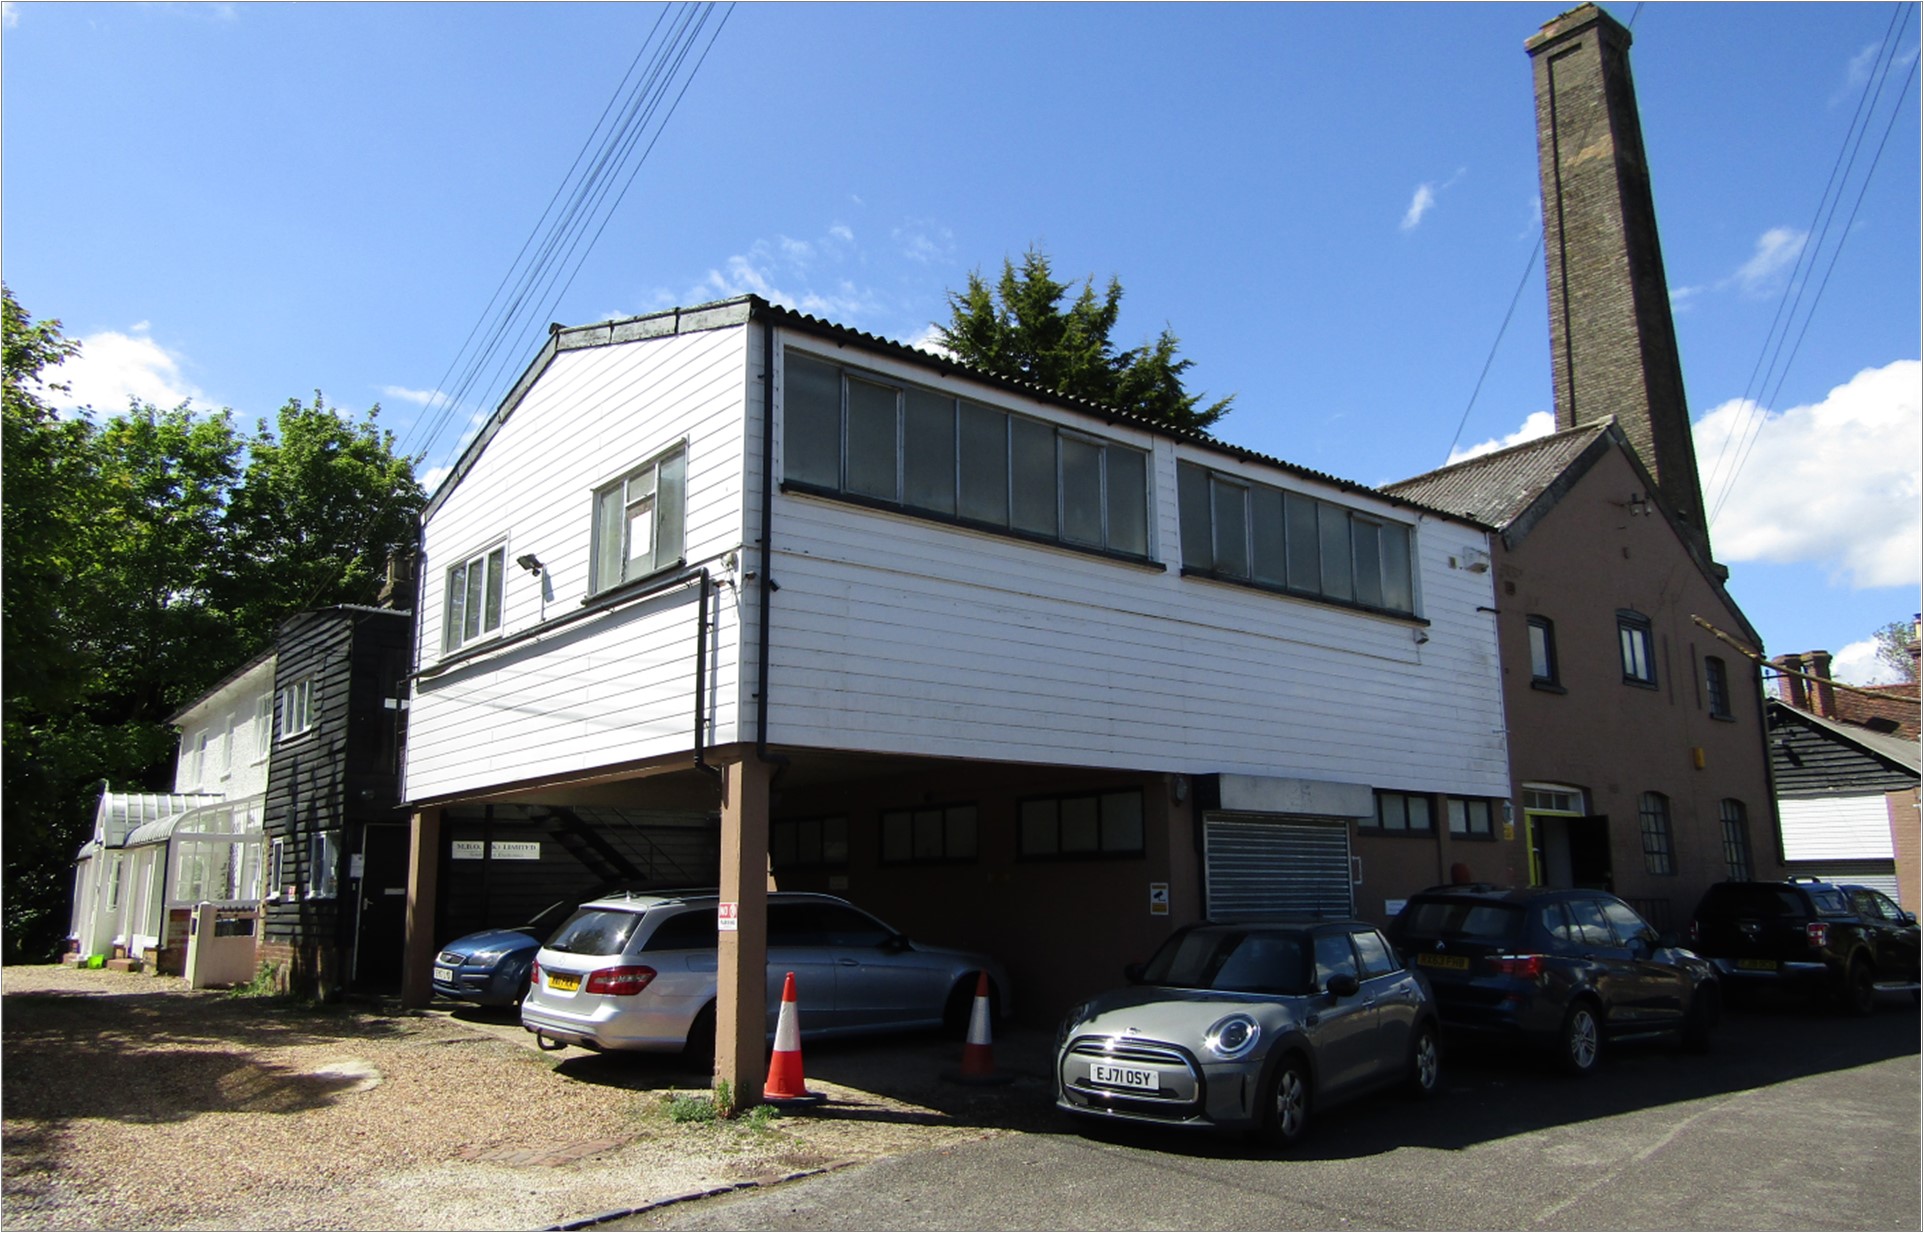 Unit 6, Old Mill Buildings, Mill End, Standon